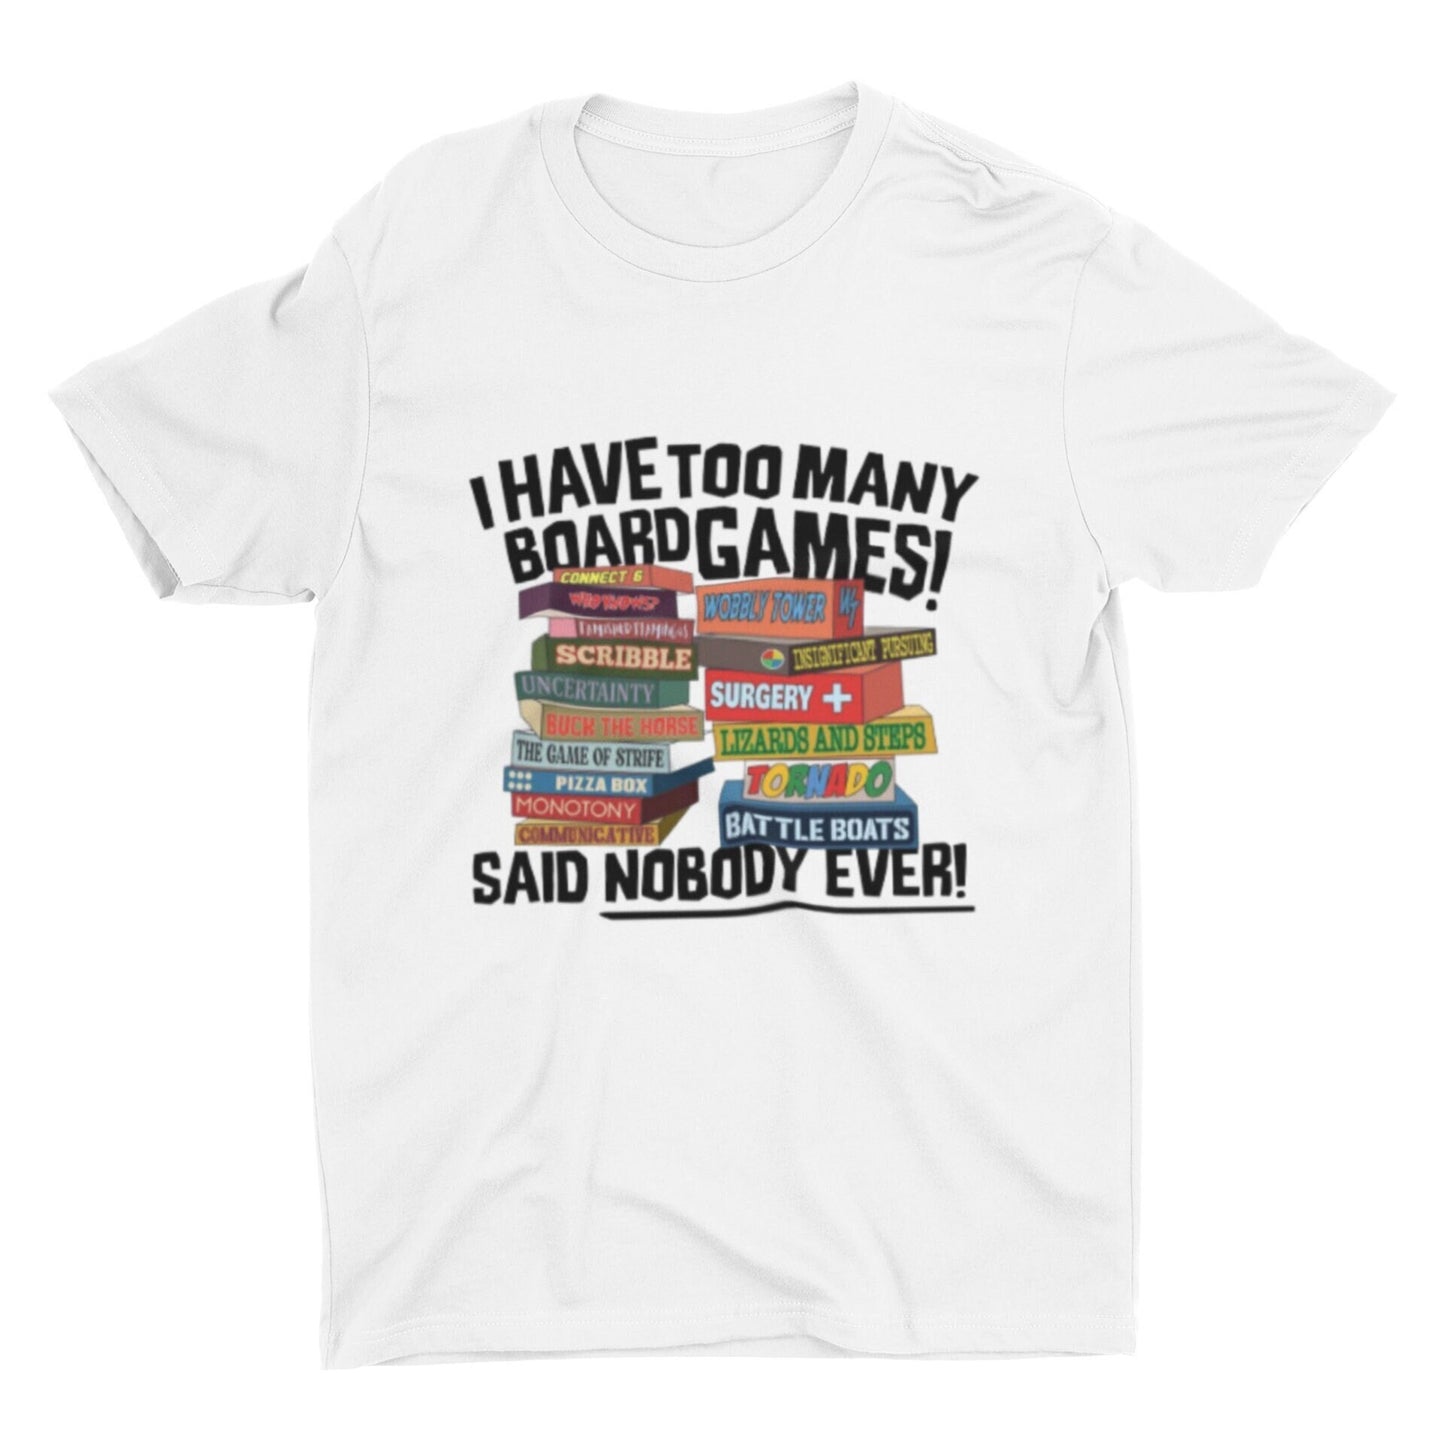 I Have Too Many Board Games T Shirt | Board Game Lover T Shirt | Board Game T Shirt | Board Game Addict | Nerd T Shirt